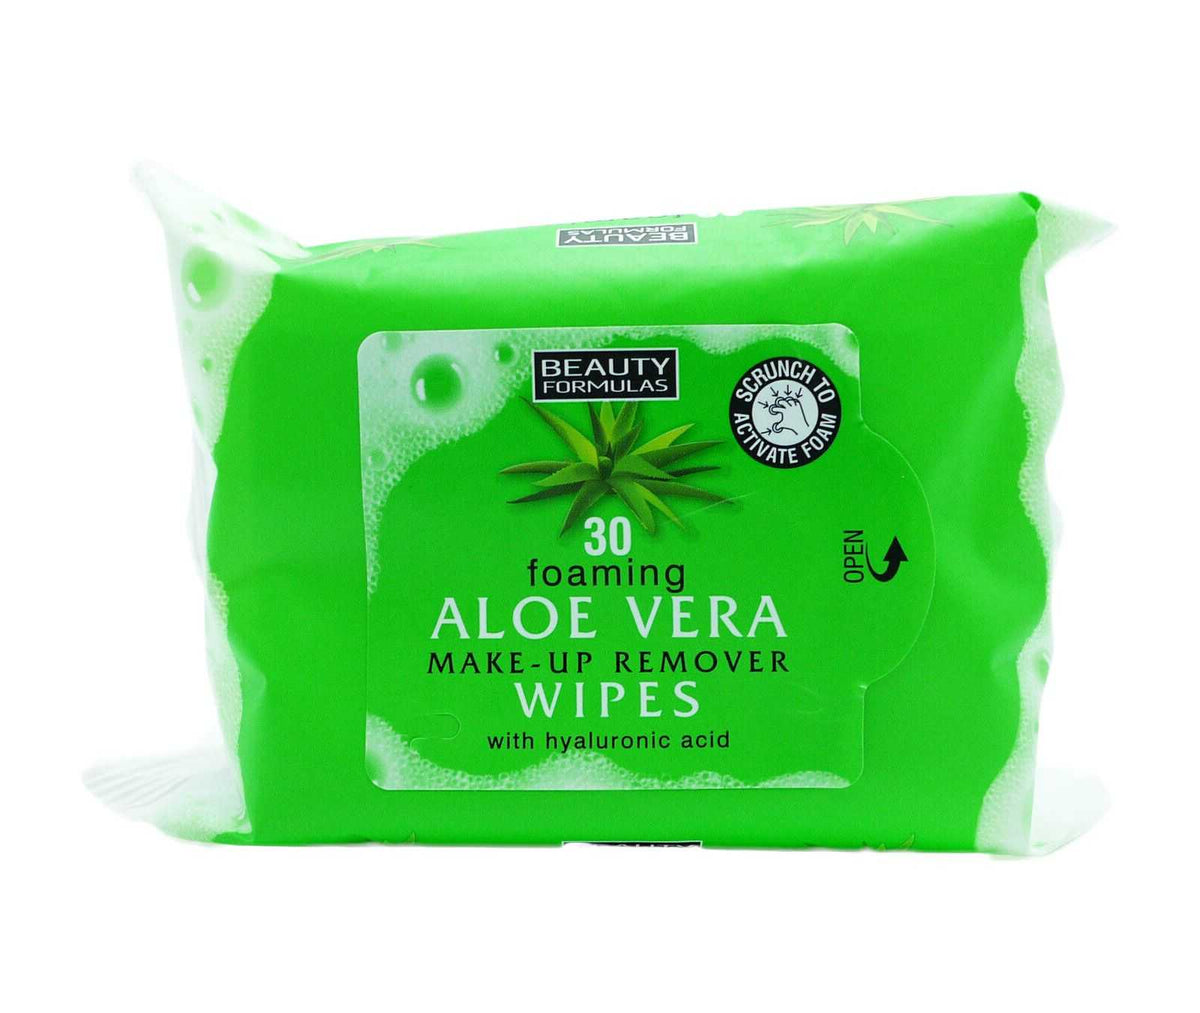 Beauty formulas makeup remover wipes with aloe vera 30 wipes